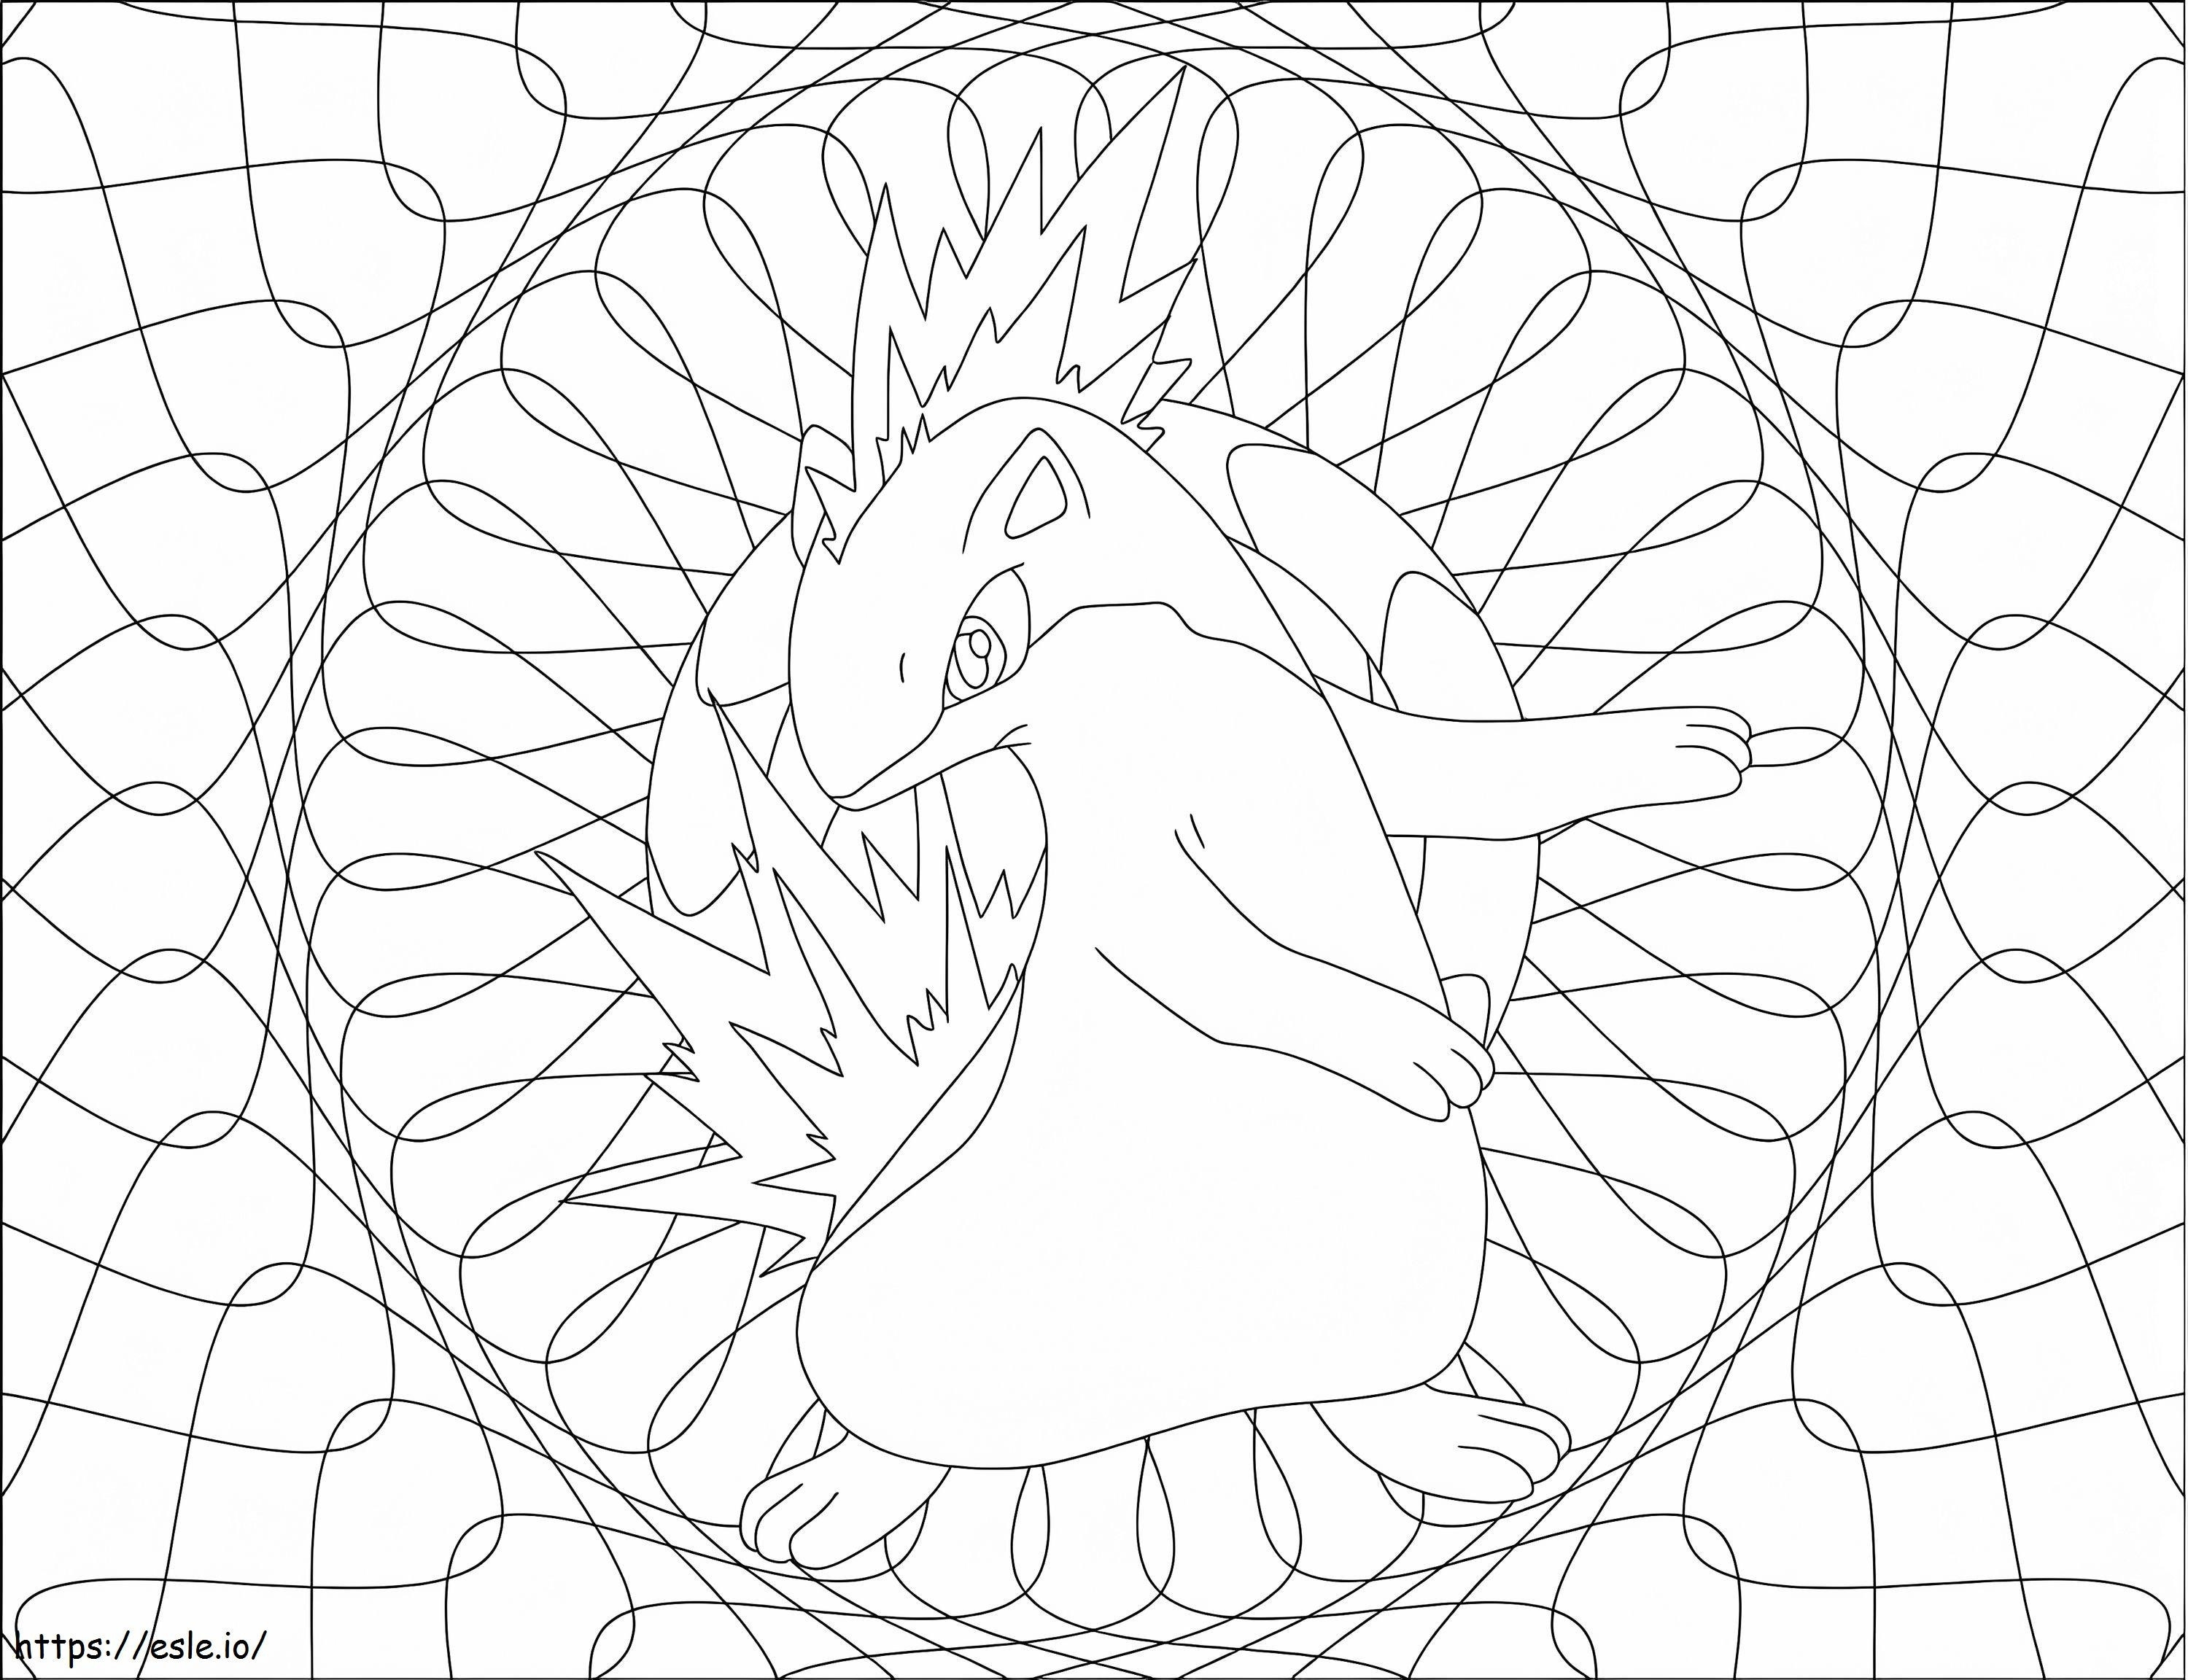 Quilava Gen 2 Pokemon coloring page